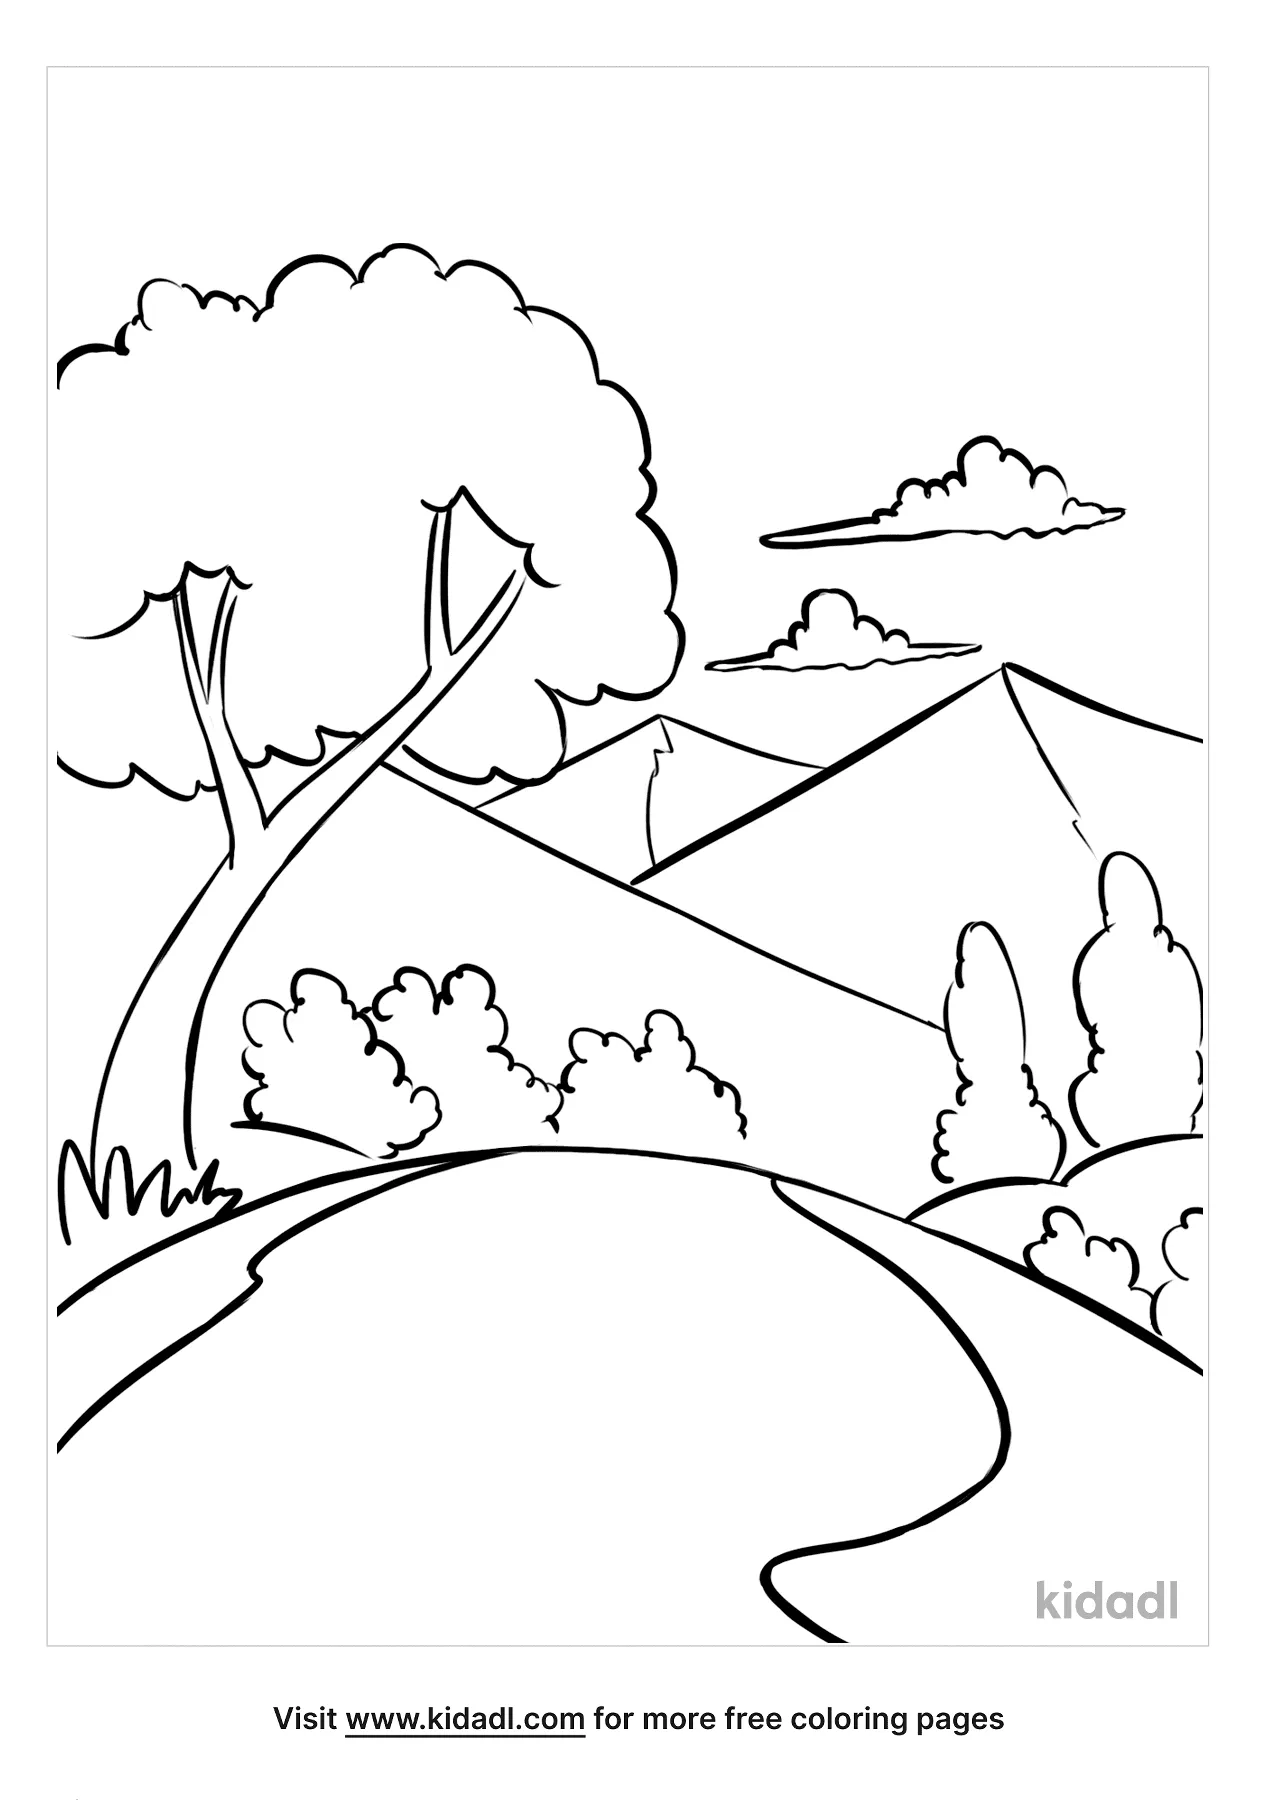 Free Landscape Coloring Page | Coloring Page Printables | Kidadl